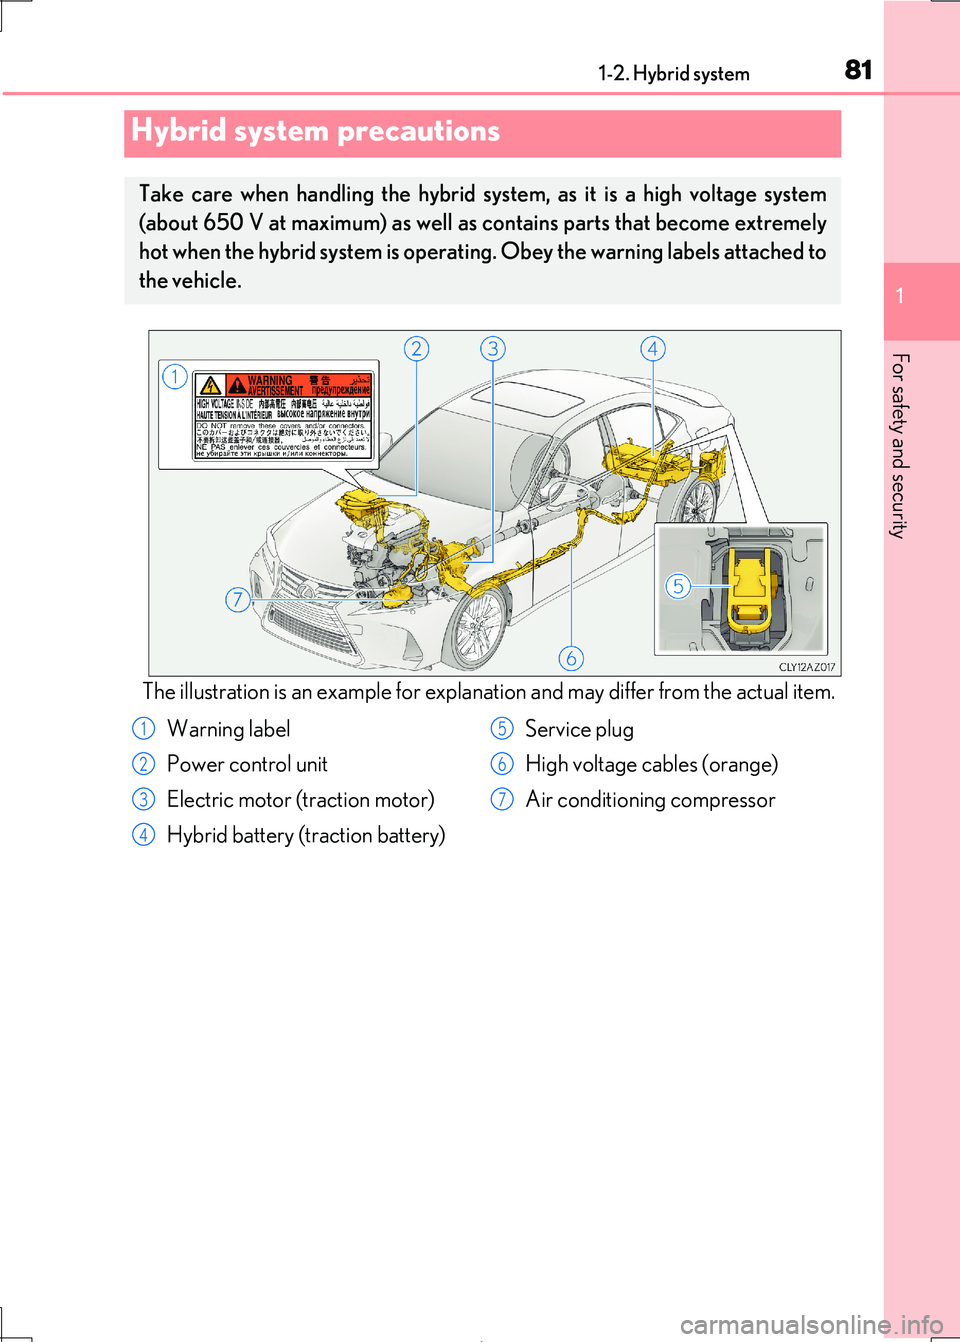 Lexus IS300h 2017  Owners Manual 811-2. Hybrid system
1
For safety and security
IS300h_EE(OM53D89E)
The illustration is an example for explanation and may differ from the actual item.
Hybrid system precautions
Take care when handling